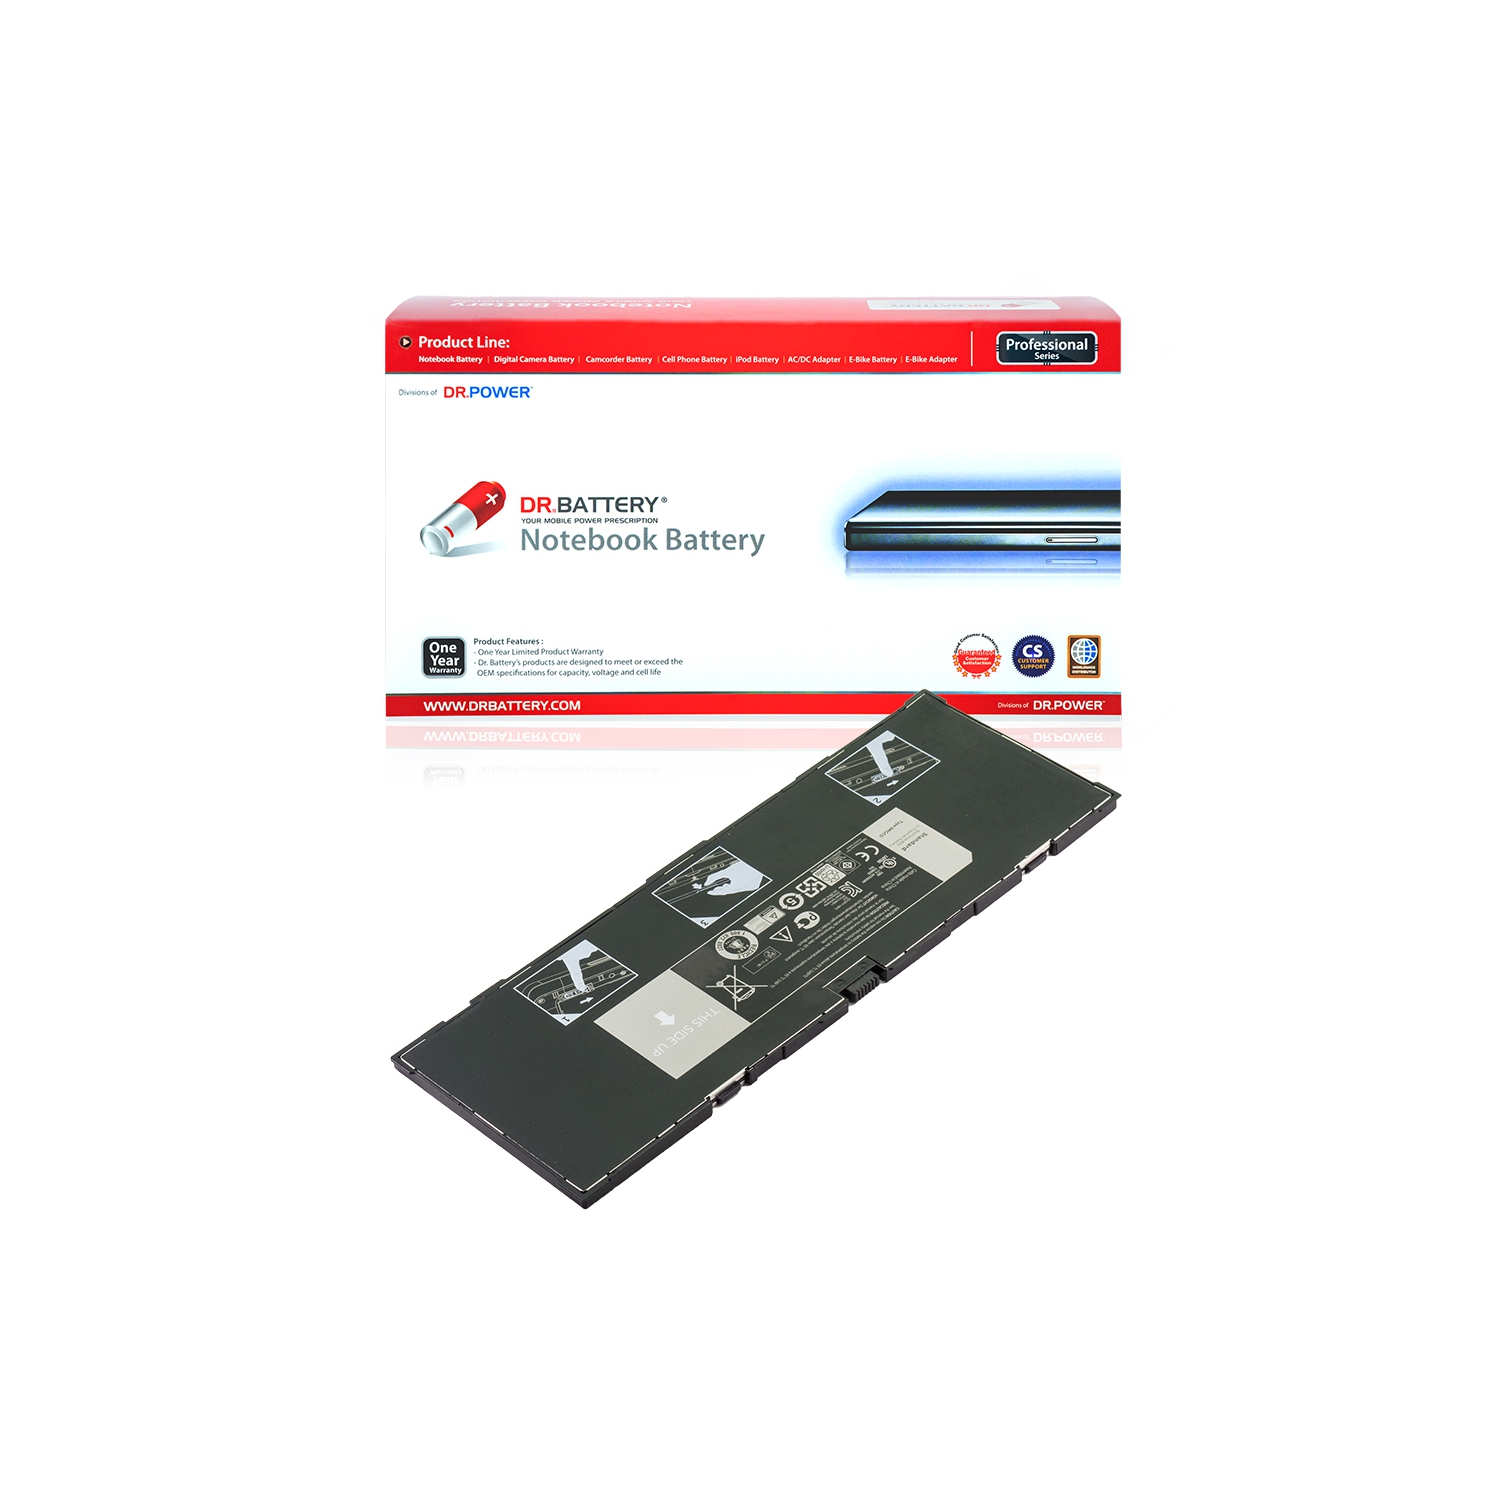 DR. BATTERY - Replacement for Dell Venue 11 Pro 5130 / 11 Pro 5130-9356 / 11 Pro T06G / T8NH4 / VYP88 / XMFY3 / 0T8NH4 [7.4V / 4324 mAh / 32Wh] ***Free Shipping***